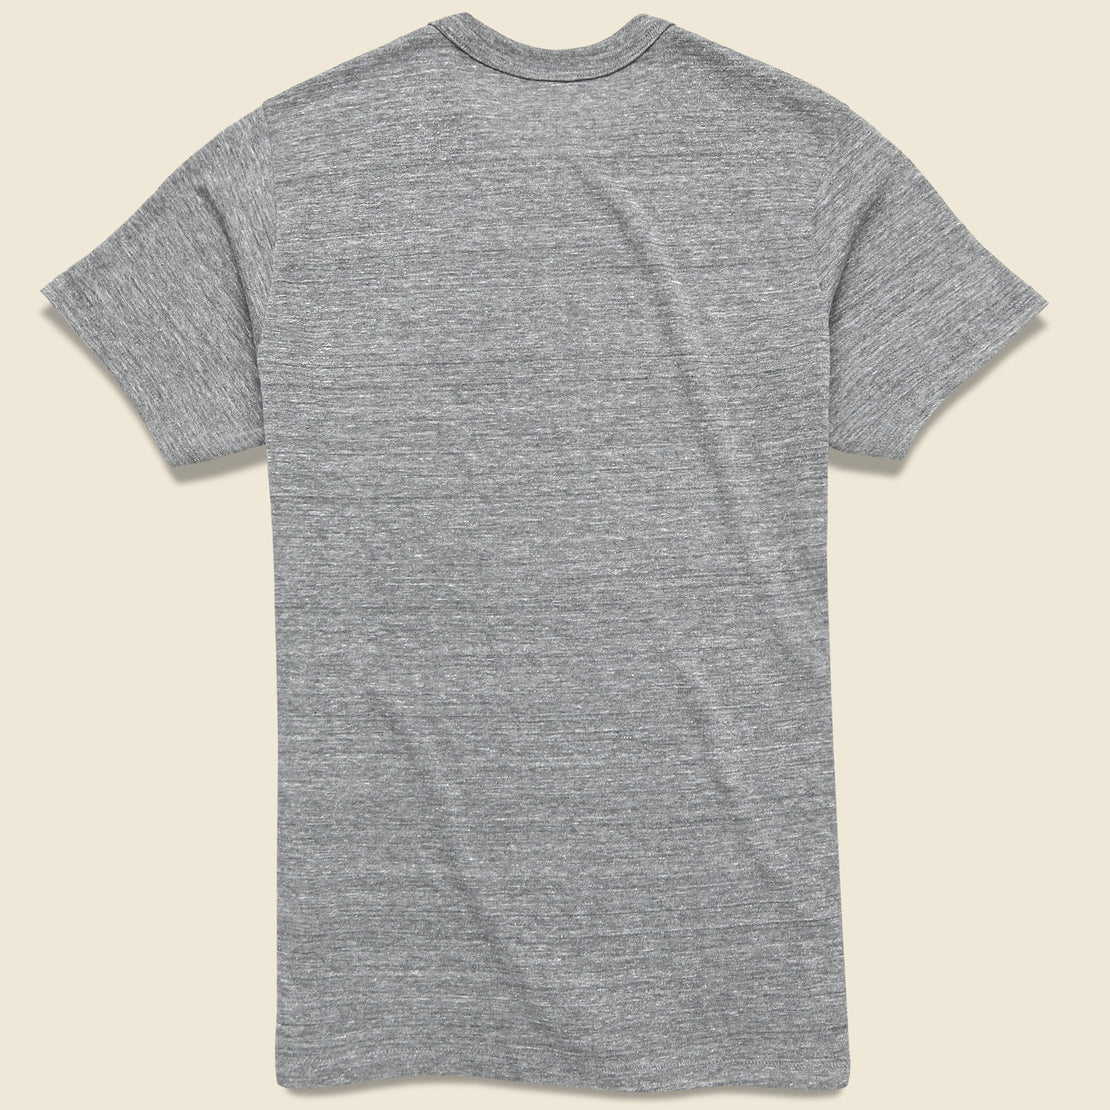 Graphic Tee - Texas - STAG - STAG Provisions - Tops - S/S Tee - Graphic